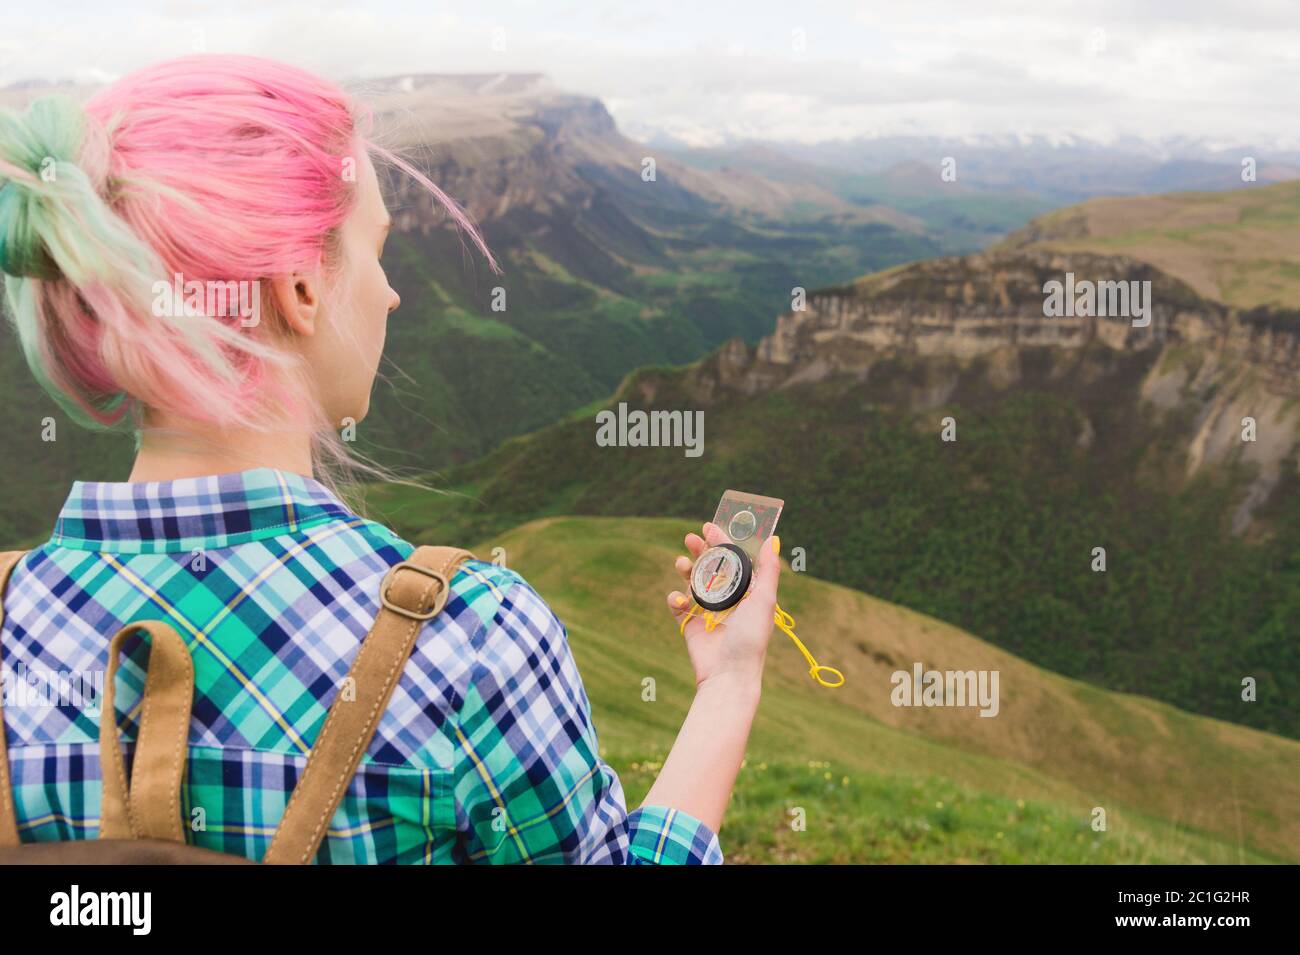 A hipster girl traveled with a blogger in a plaid shirt and with multi-colored hair using a compass in the background in the bac Stock Photo